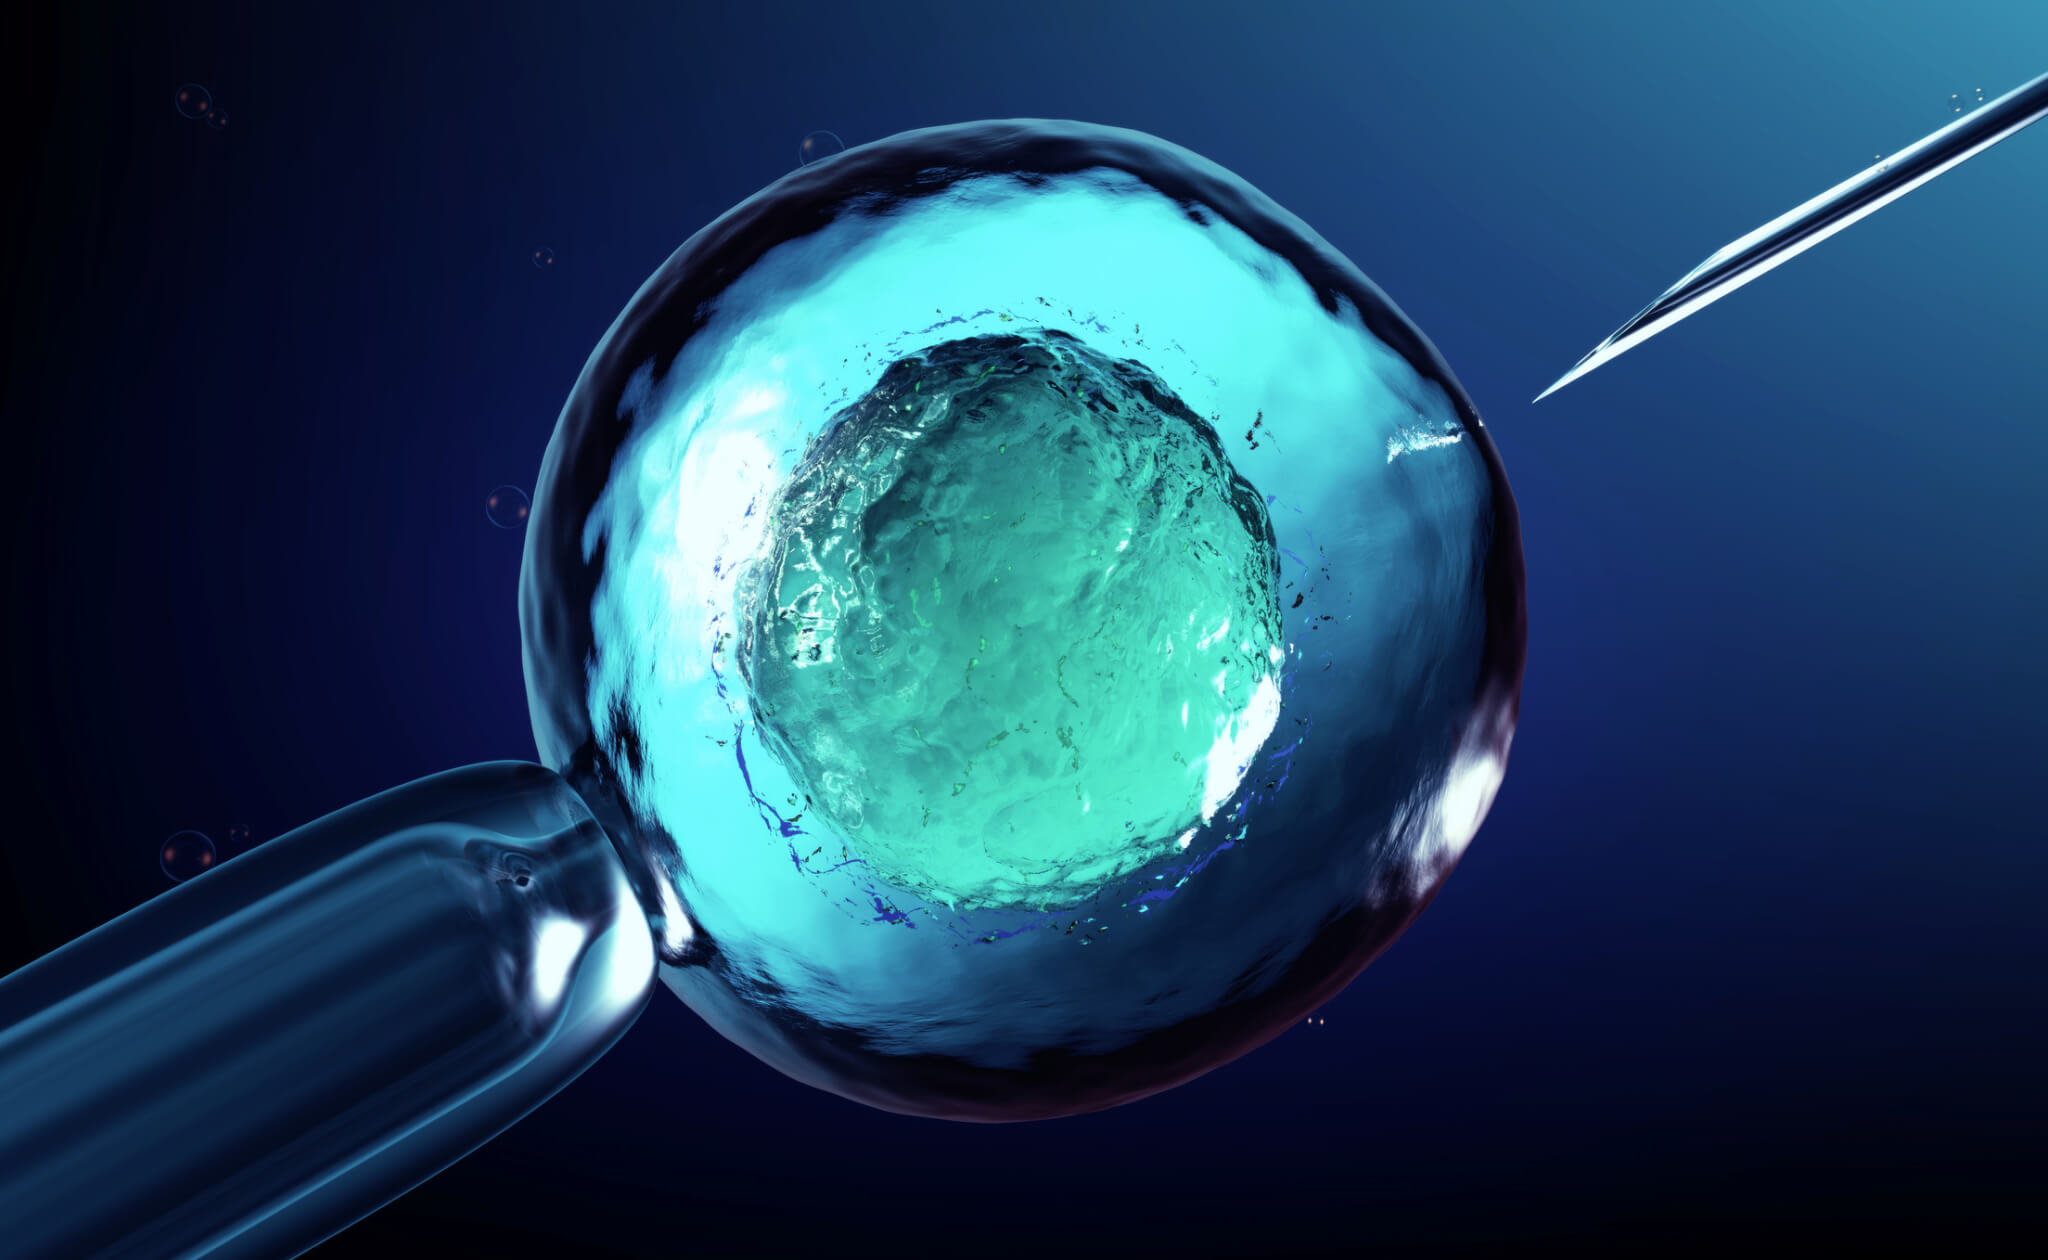 artificial insemination or IVF rendering